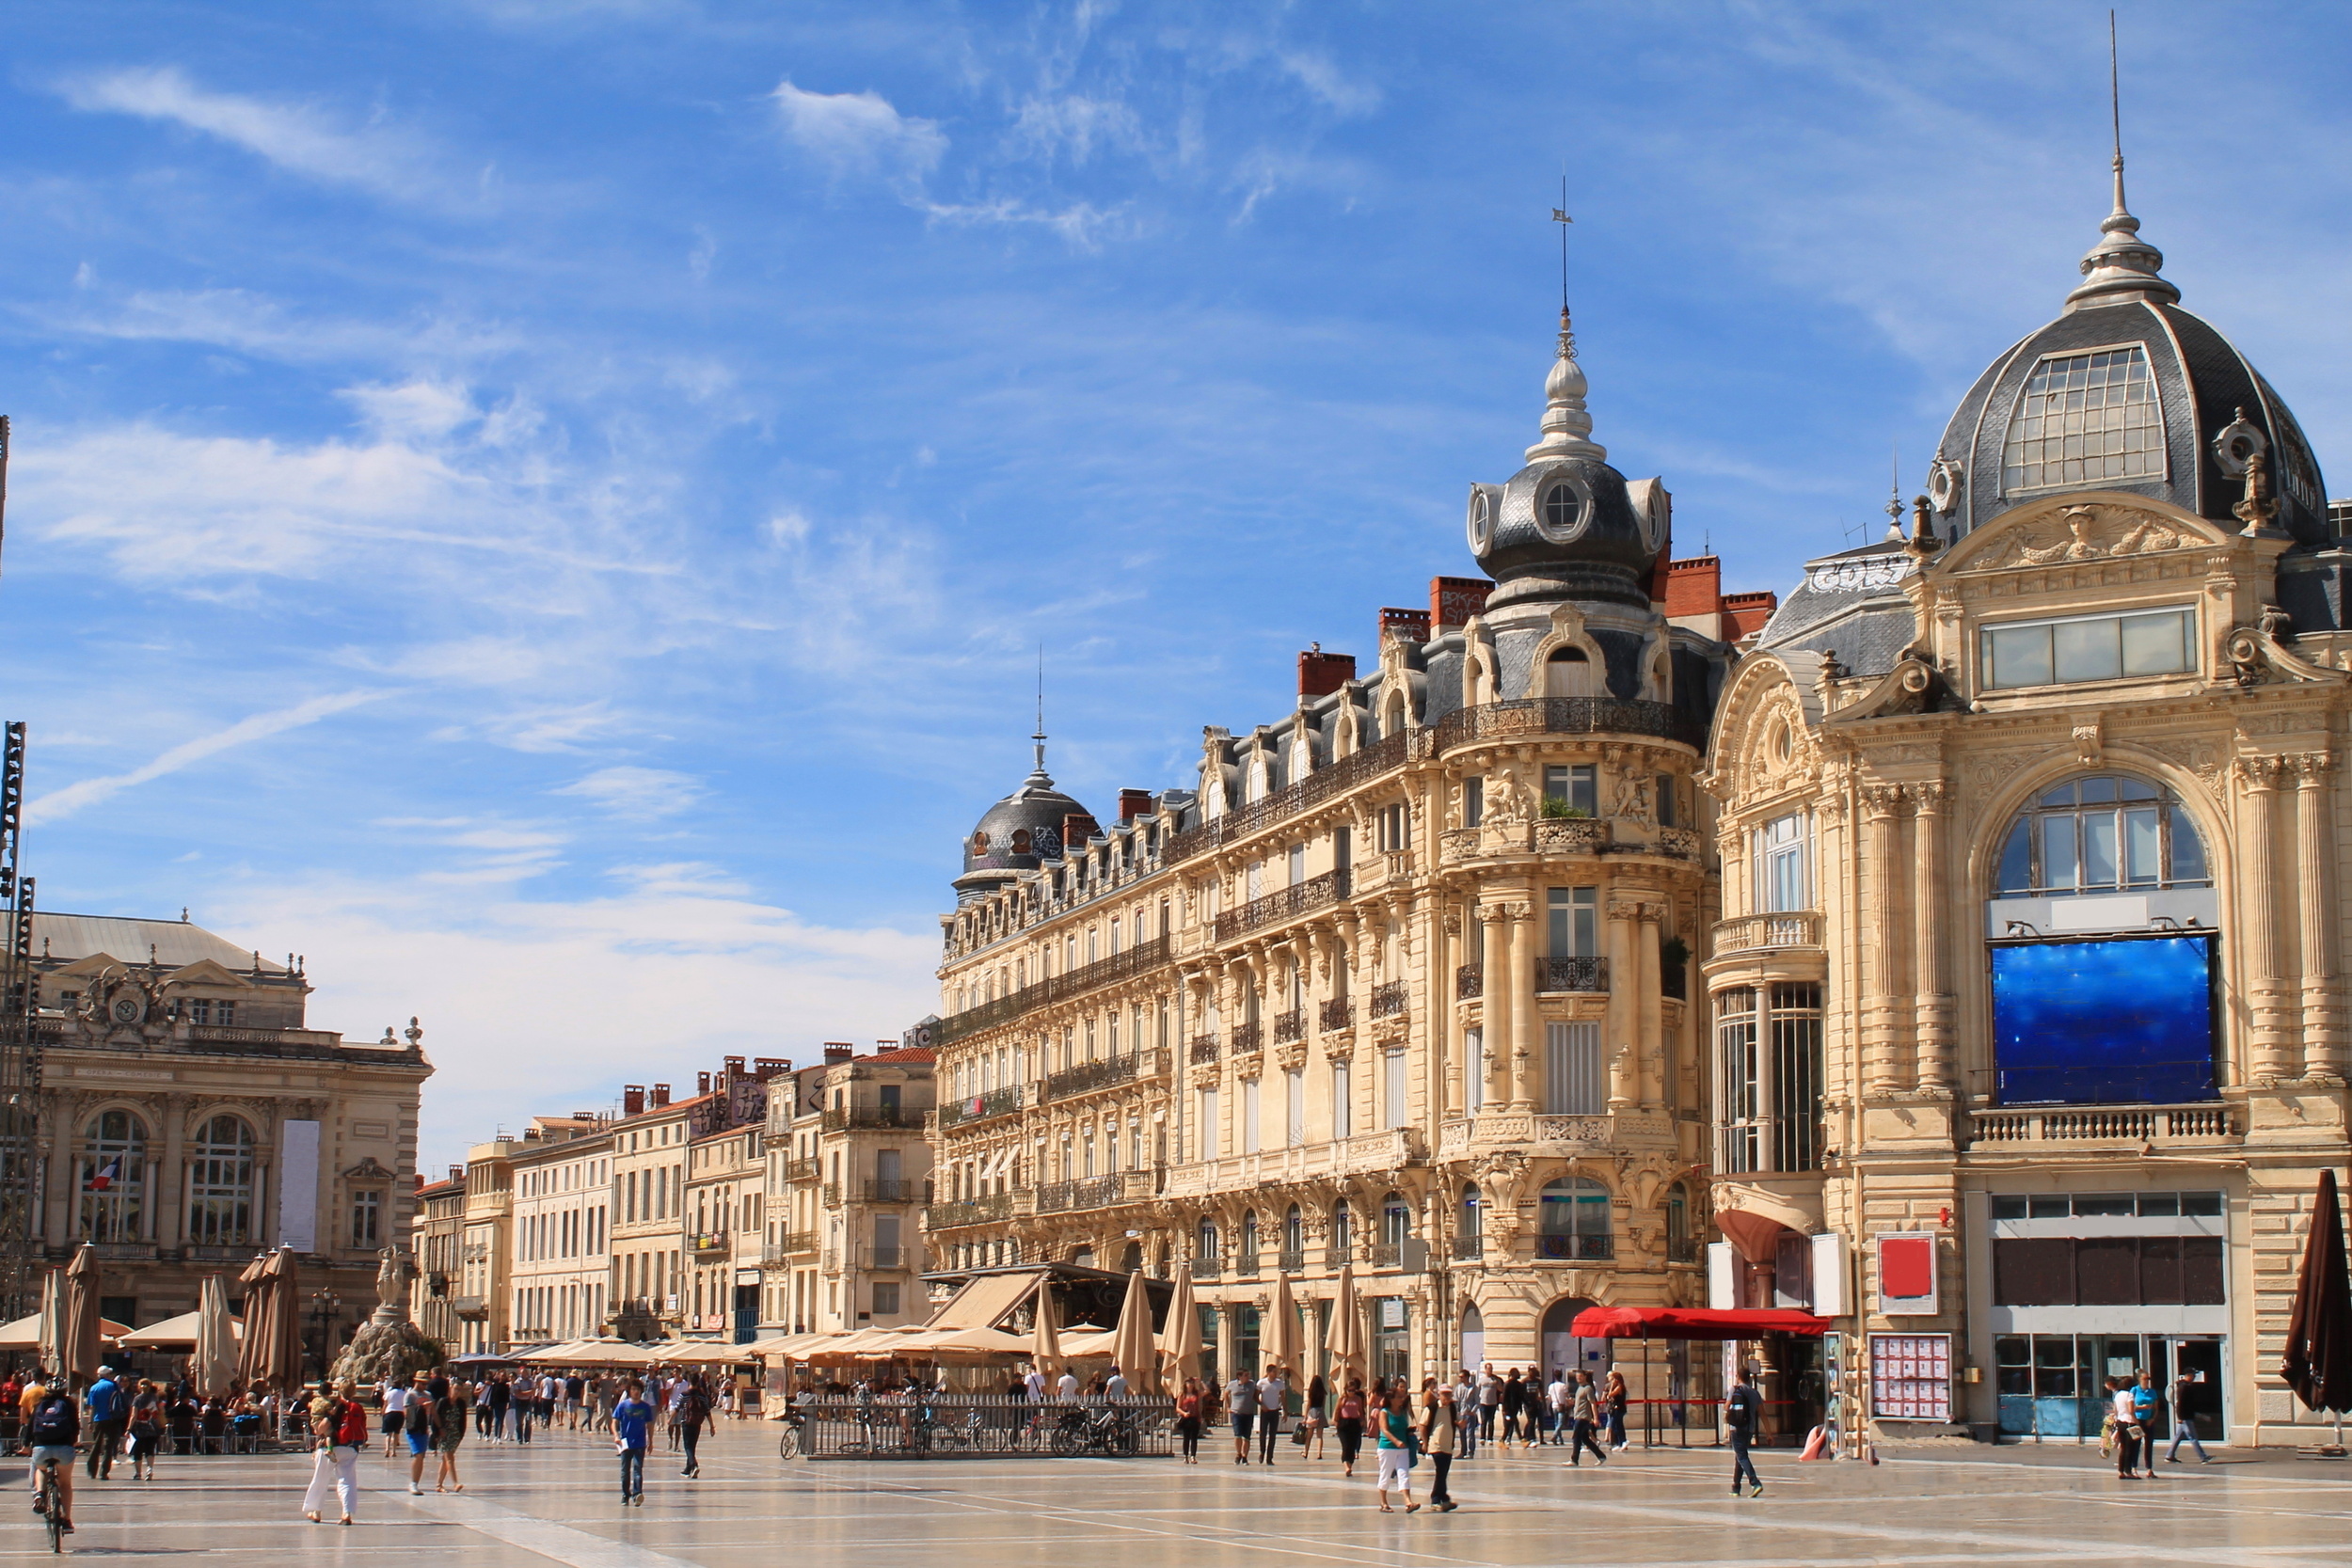 <p>This student city in the center of southern France doesn't receive the attention it absolutely deserves! The streets are perfect for wandering, the markets and restaurants have some of the most affordable food in the region, and the beach is just an easy bike or tram ride away.</p><p><a href='https://www.msn.com/en-us/community/channel/vid-cj9pqbr0vn9in2b6ddcd8sfgpfq6x6utp44fssrv6mc2gtybw0us'>Follow us on MSN to see more of our exclusive lifestyle content.</a></p>